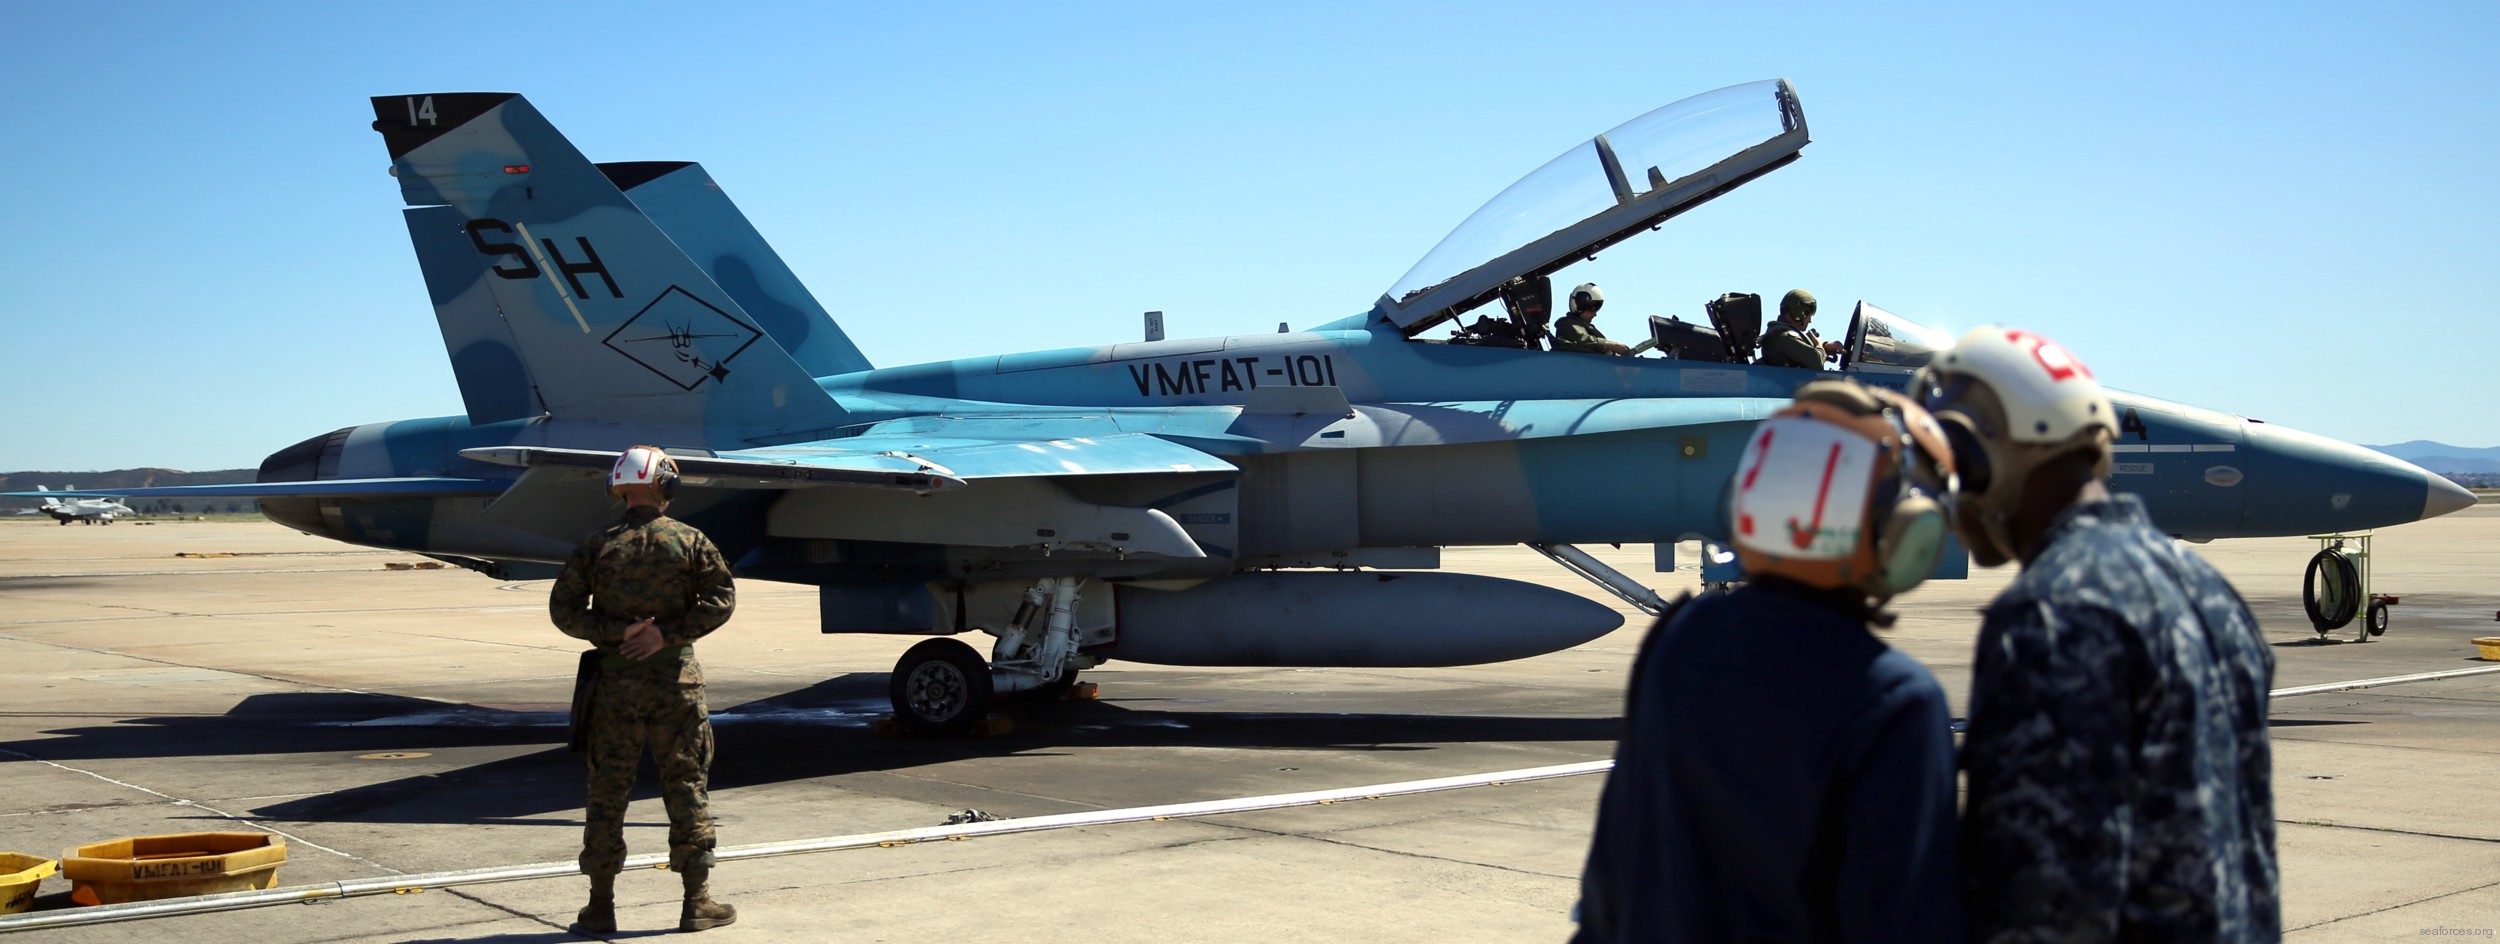 vmfat-101 sharpshooters marine fighter attack training squadron f/a-18b hornet 50